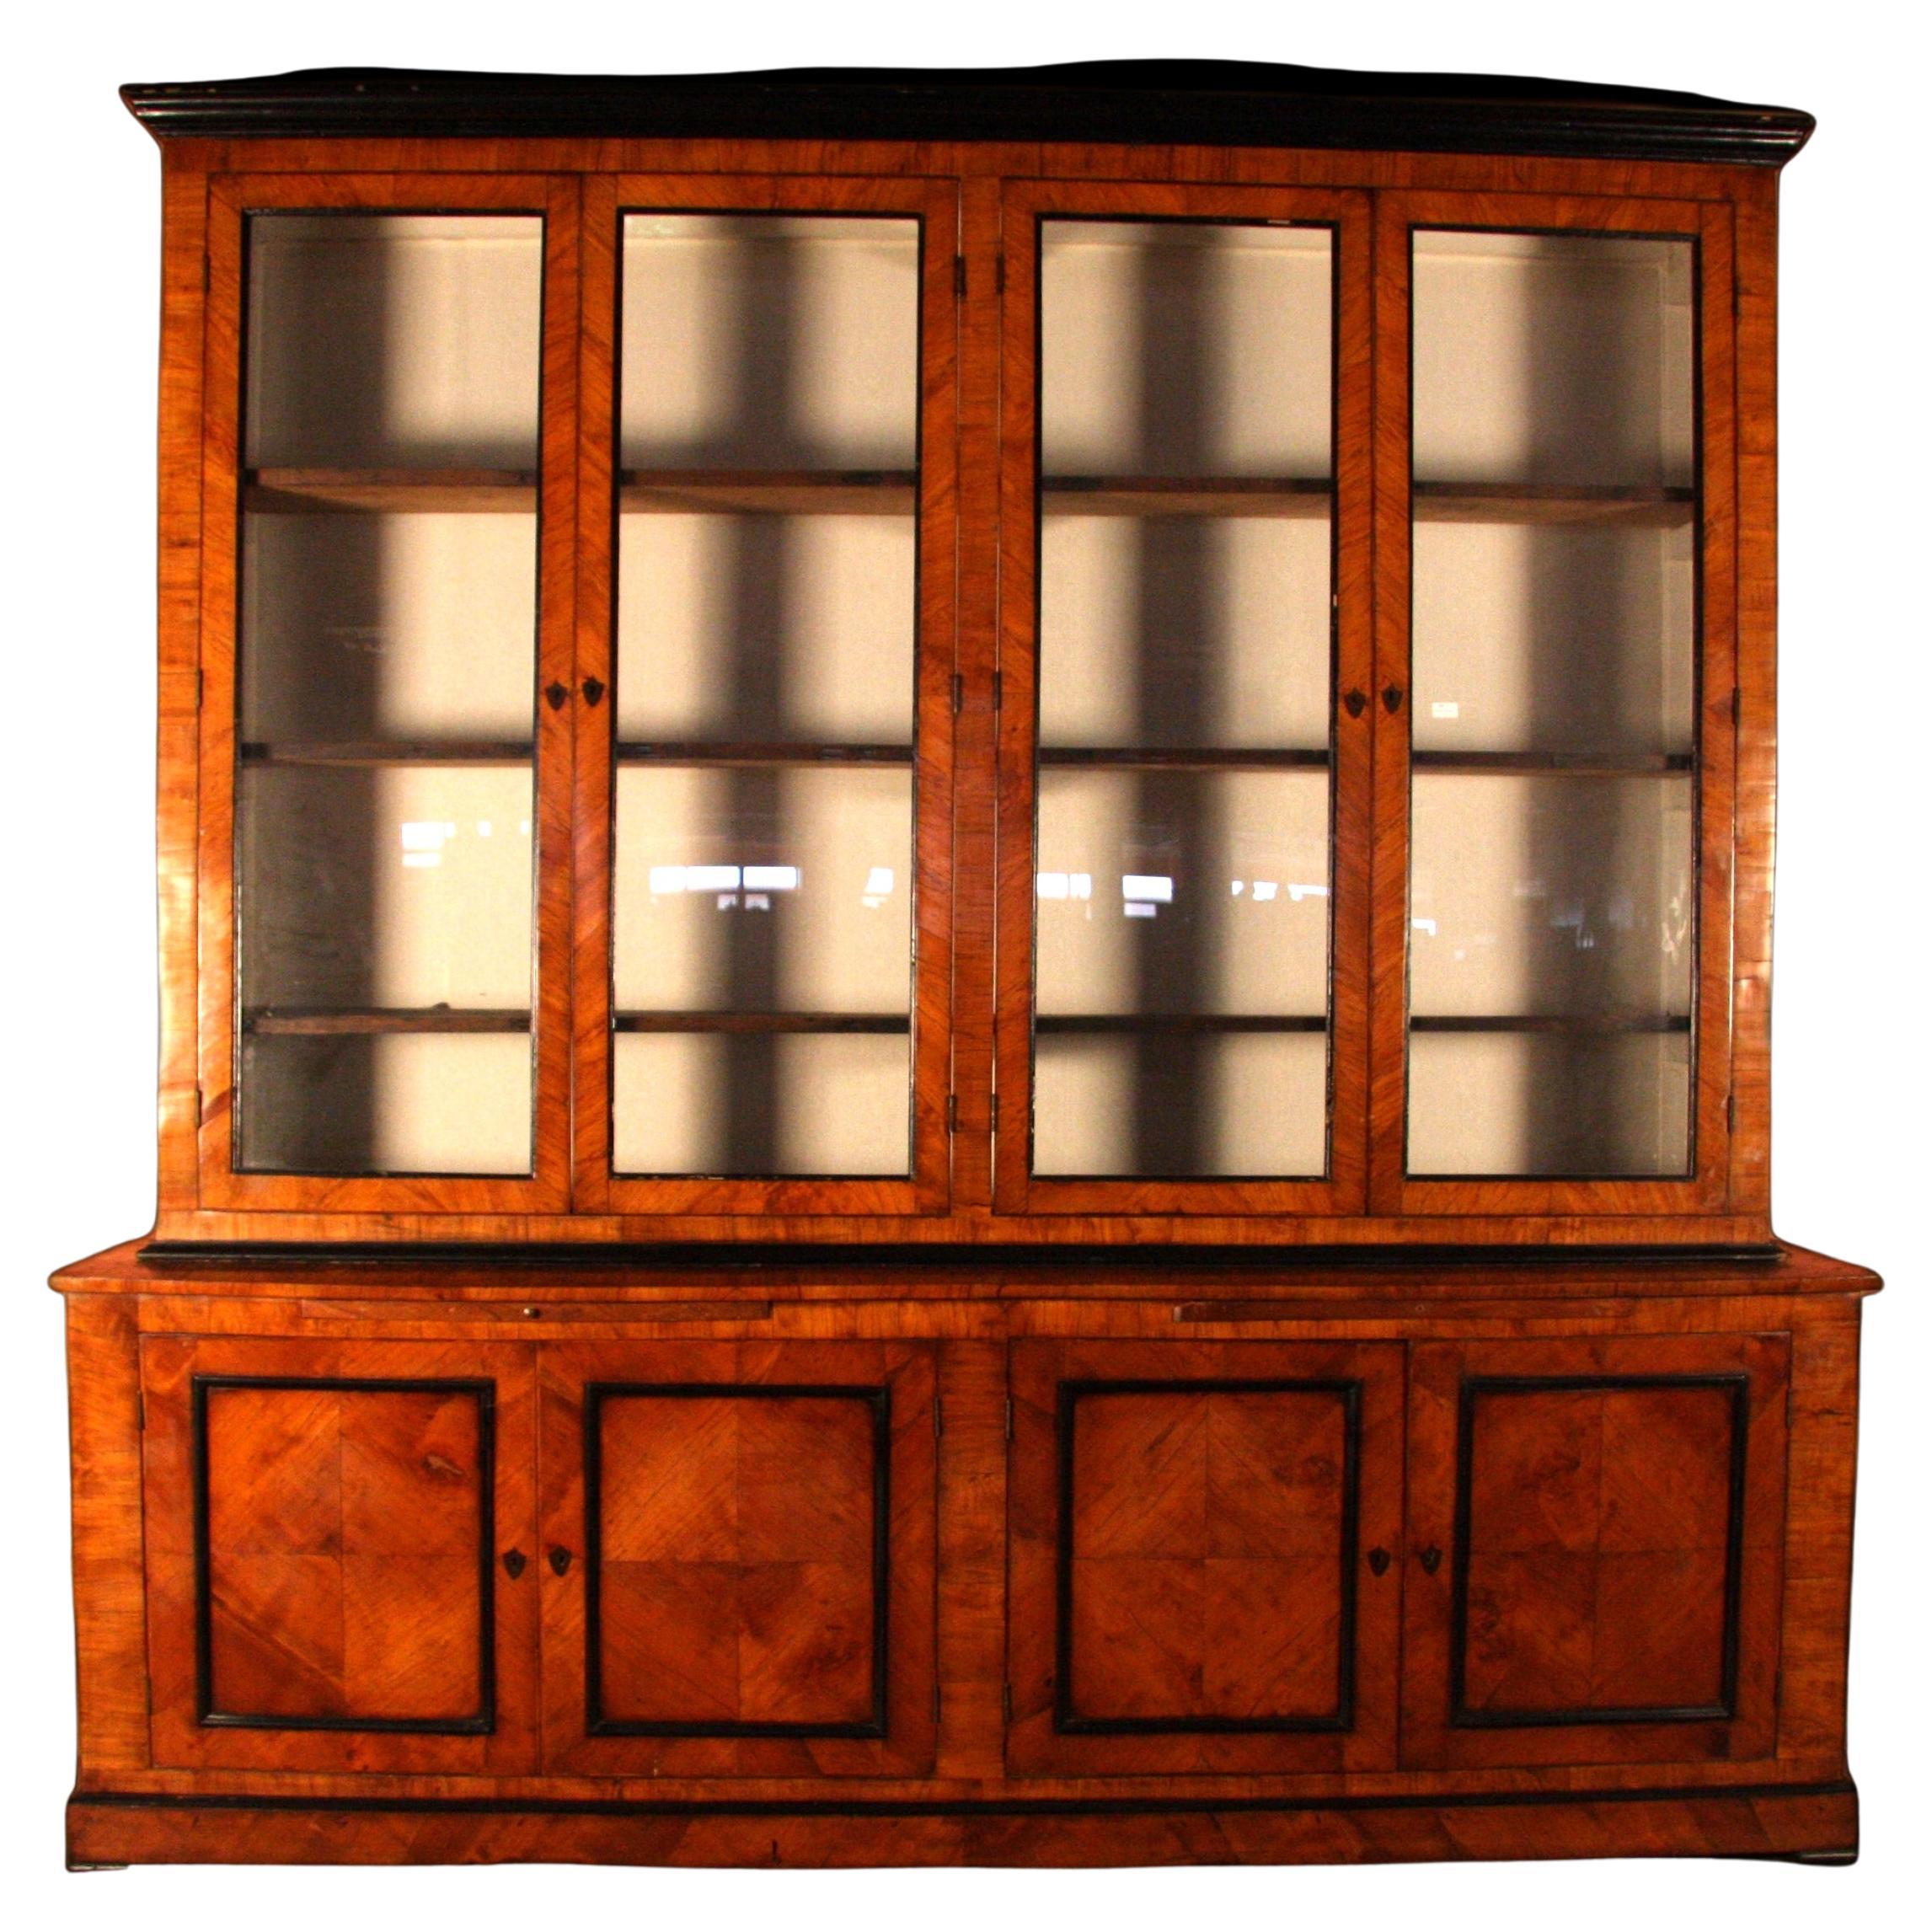 Glass bookcase with 4 doors and 4 flaps, veneered in Olive wood and with ebonized profiles.

In excellent condition, already restored in a conservative way.

Bookcase of the first years of 1800. 
Provenance: Italy.
 
Measurements: length of the base